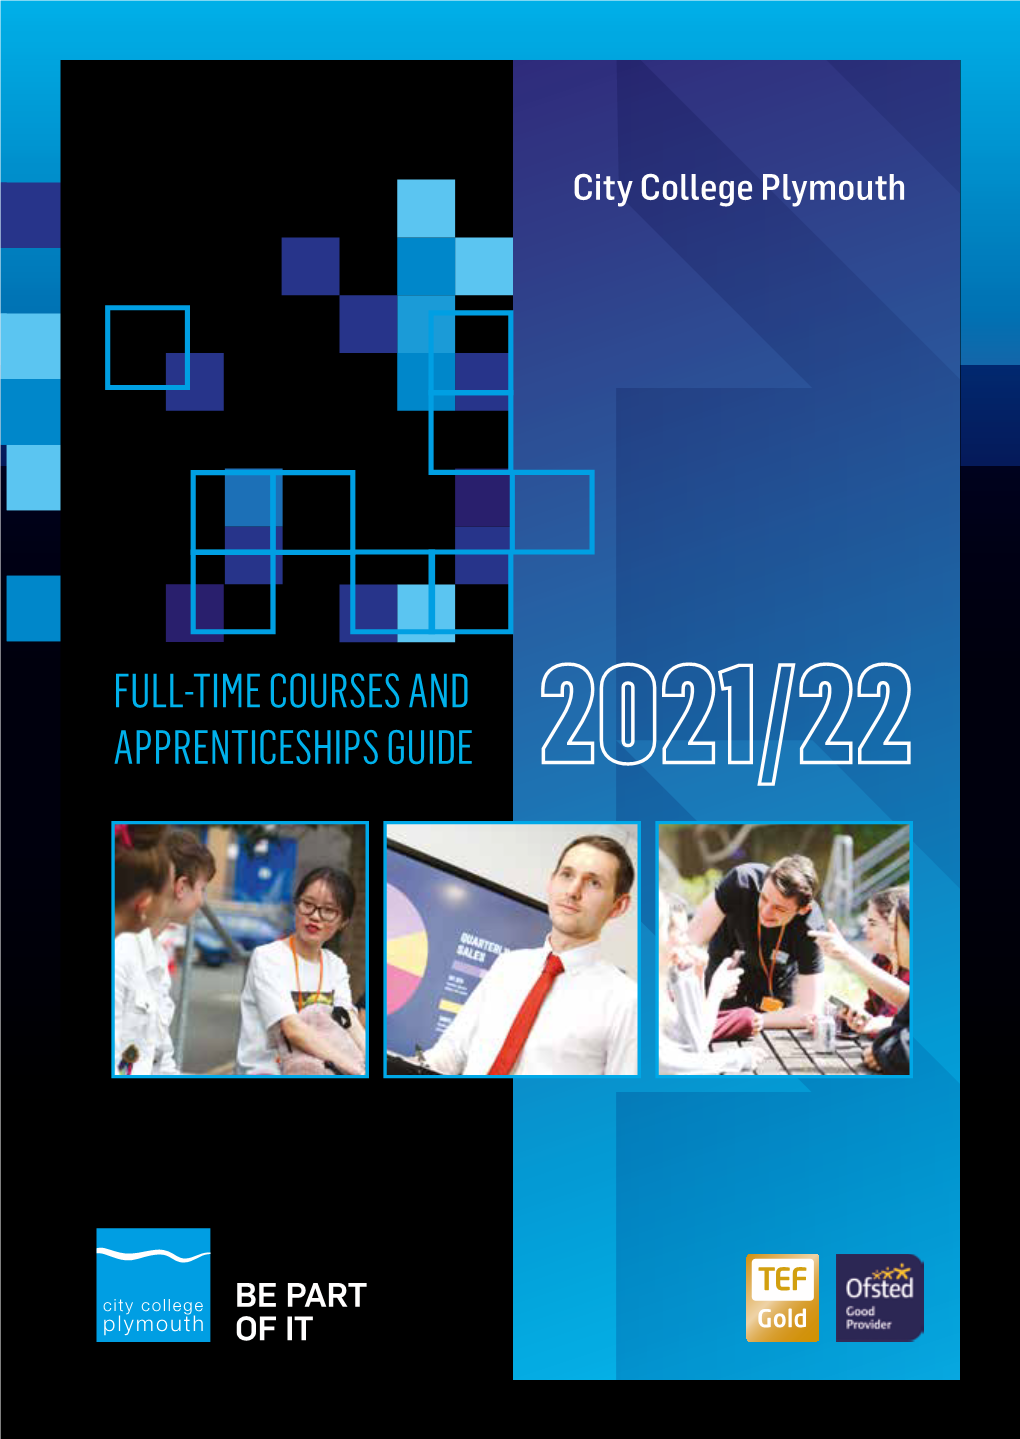 FULL-TIME COURSES and APPRENTICESHIPS GUIDE Full-Time Courses and Apprenticeships Guide